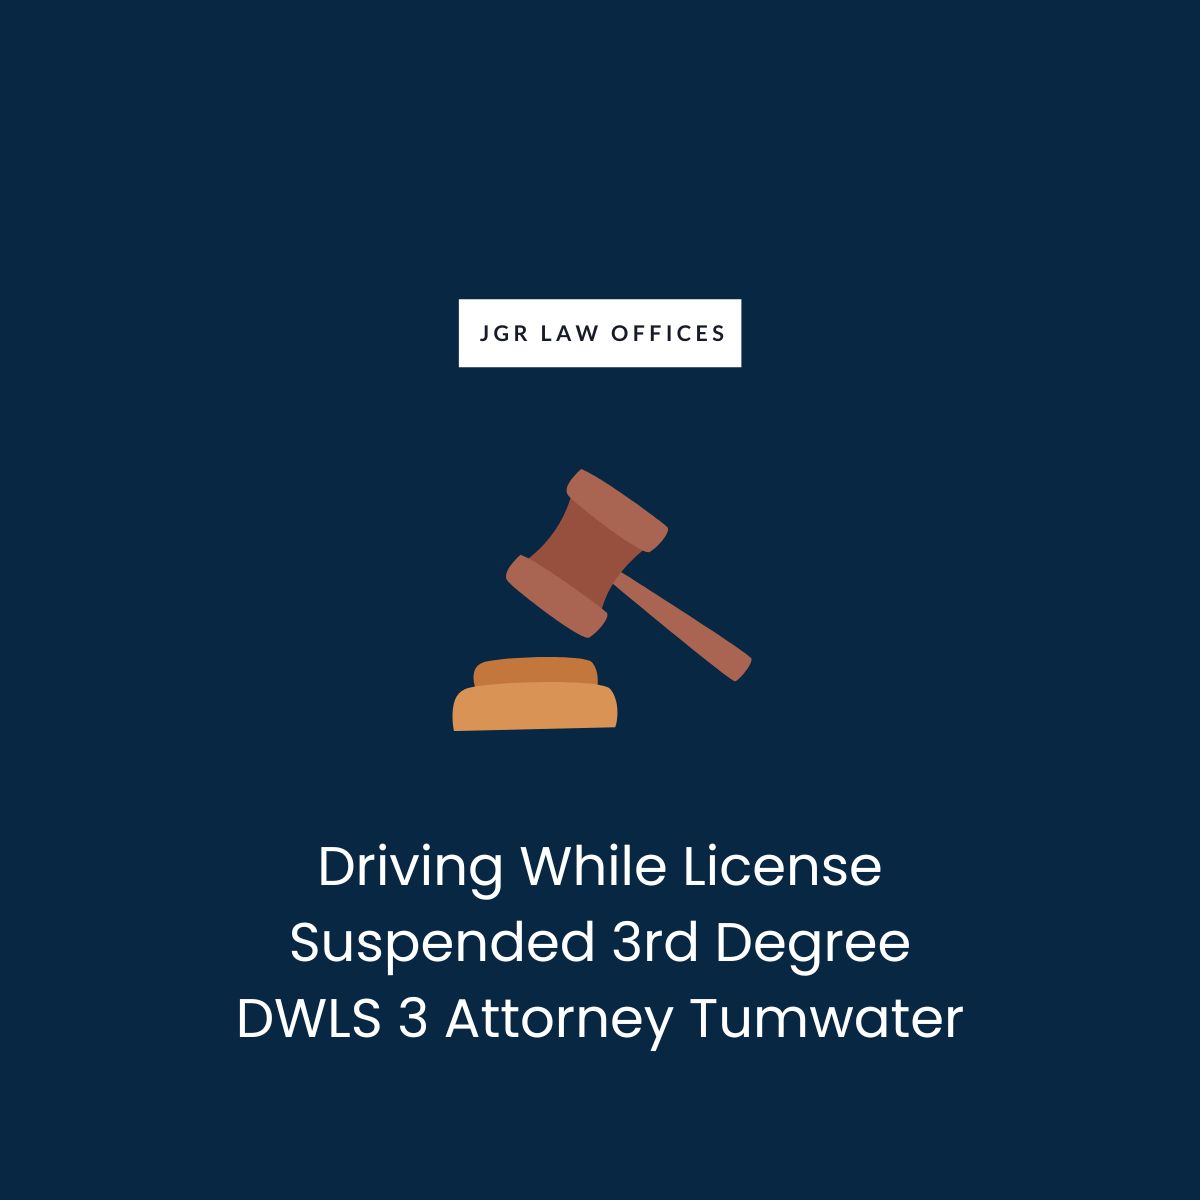 Driving While License Suspended 3rd Degree DWLS 3 Attorney Tumwater